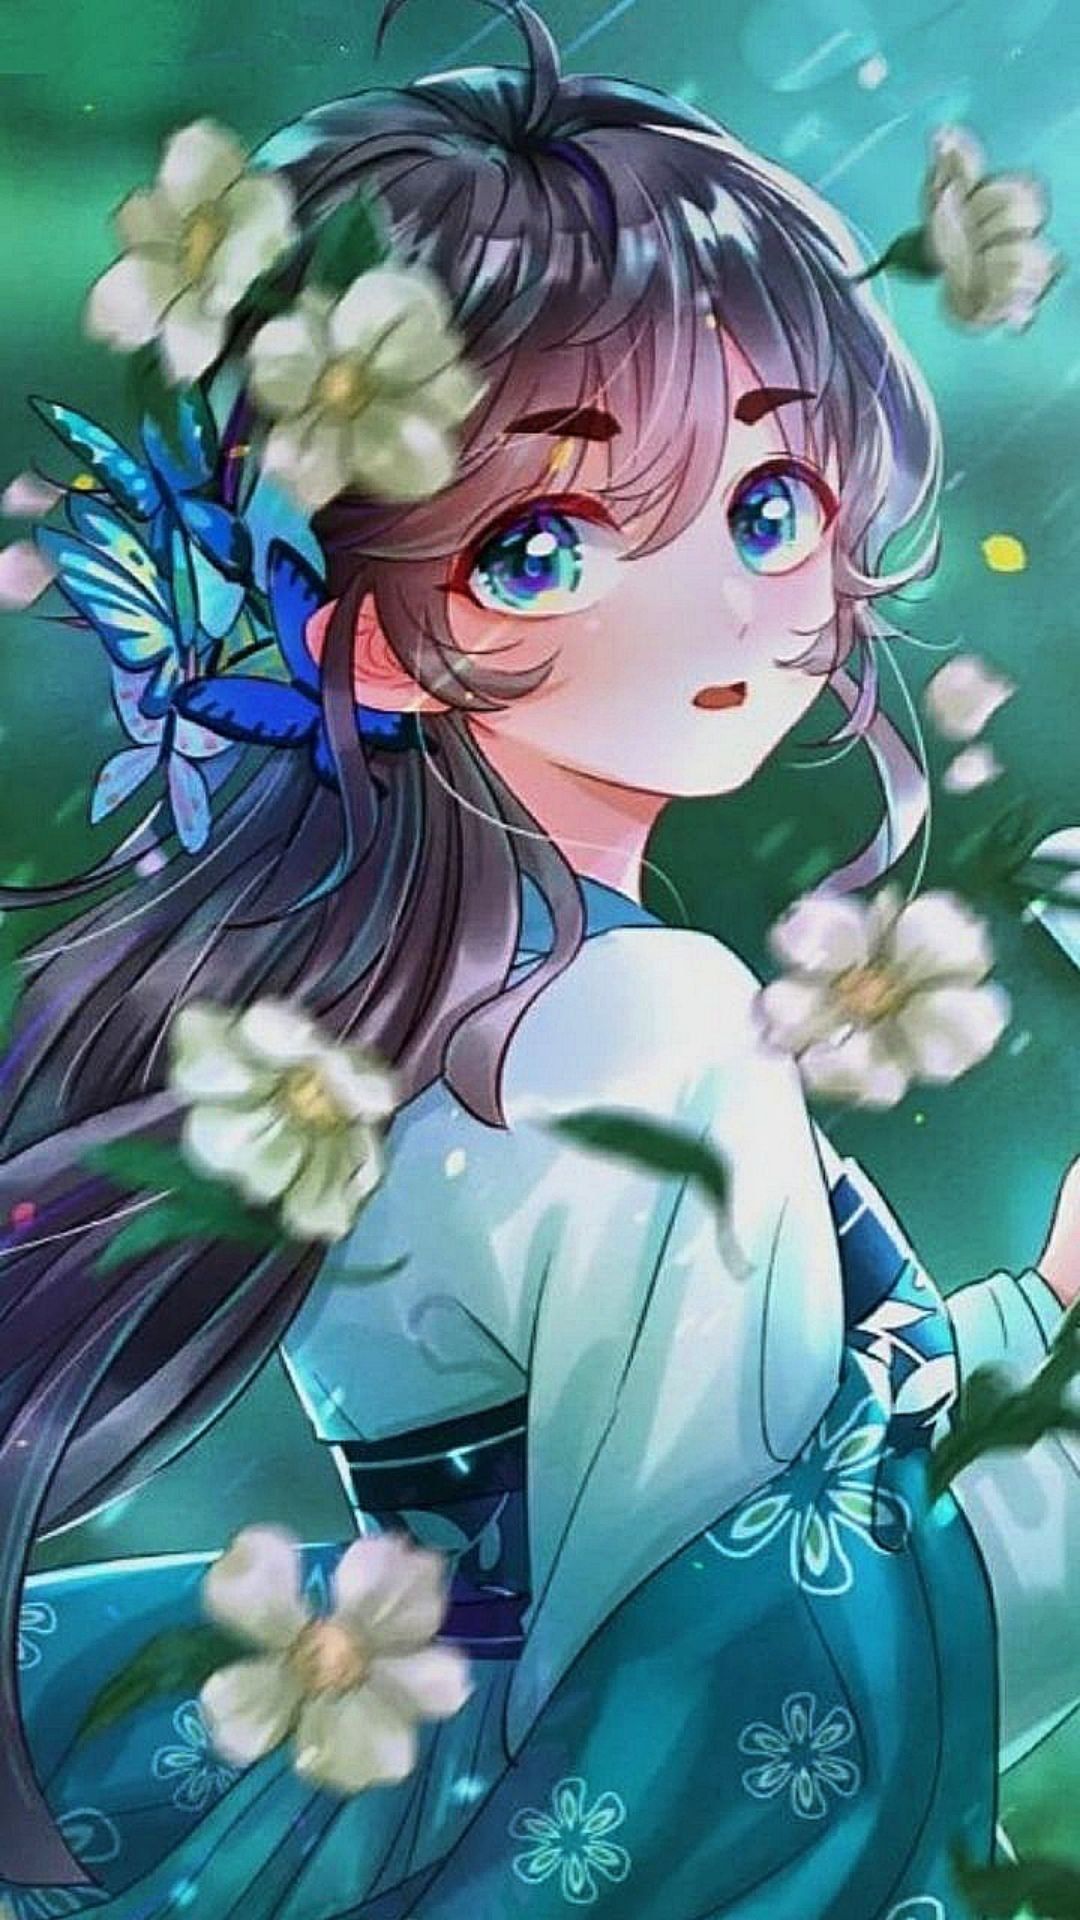 Anime girl with blue eyes and blue dress with flowers in her hair - Anime girl, pretty